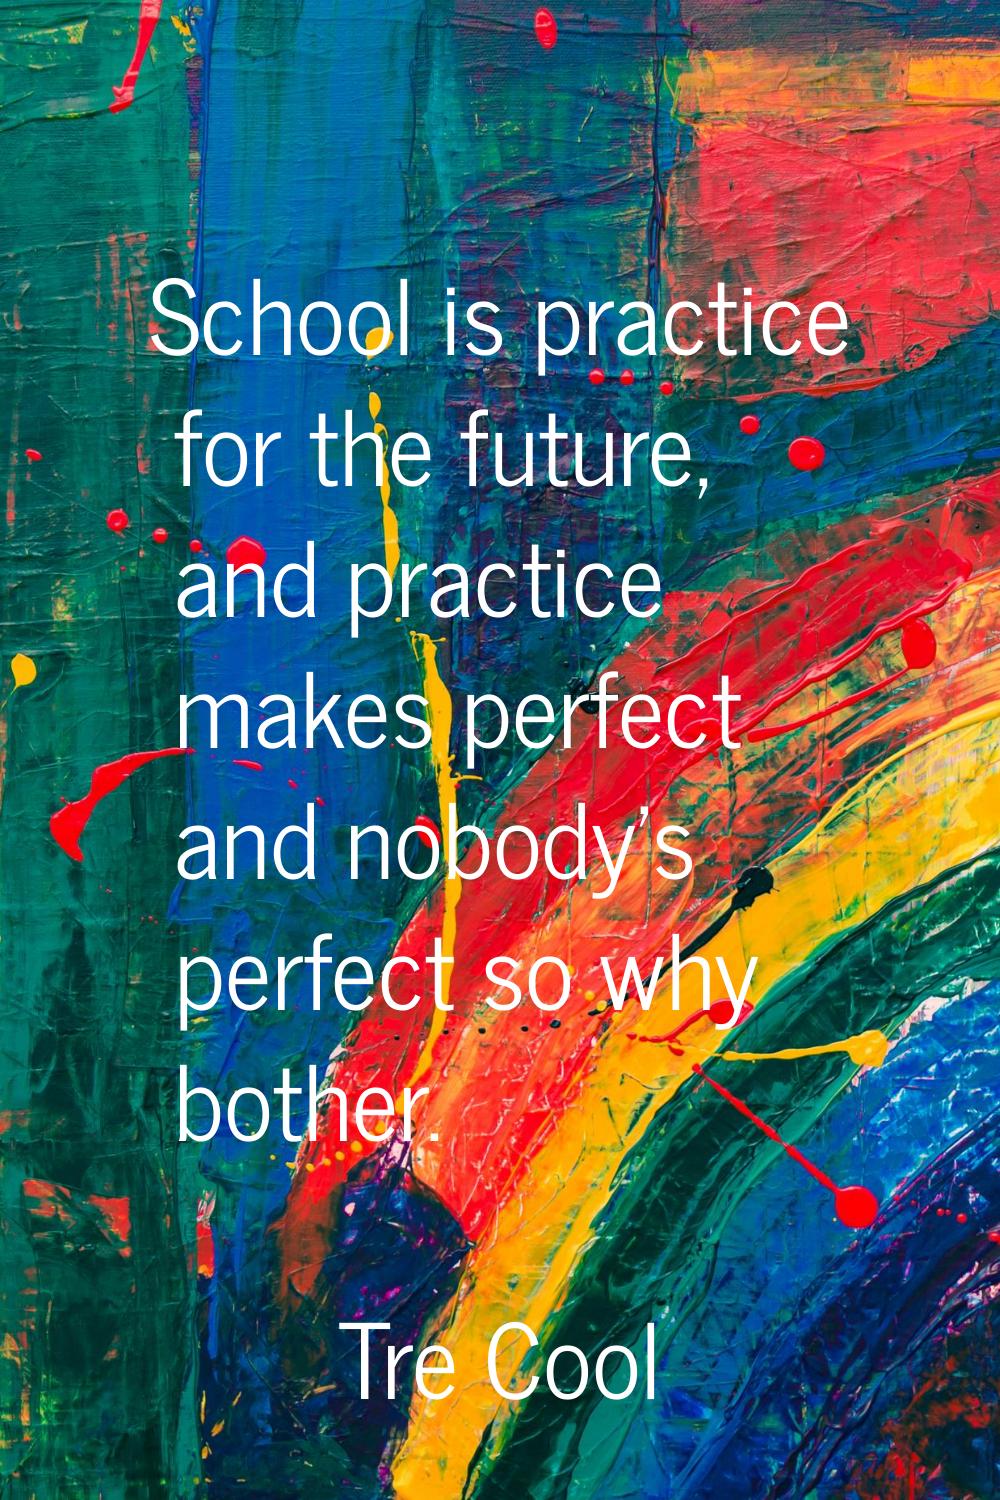 School is practice for the future, and practice makes perfect and nobody's perfect so why bother.